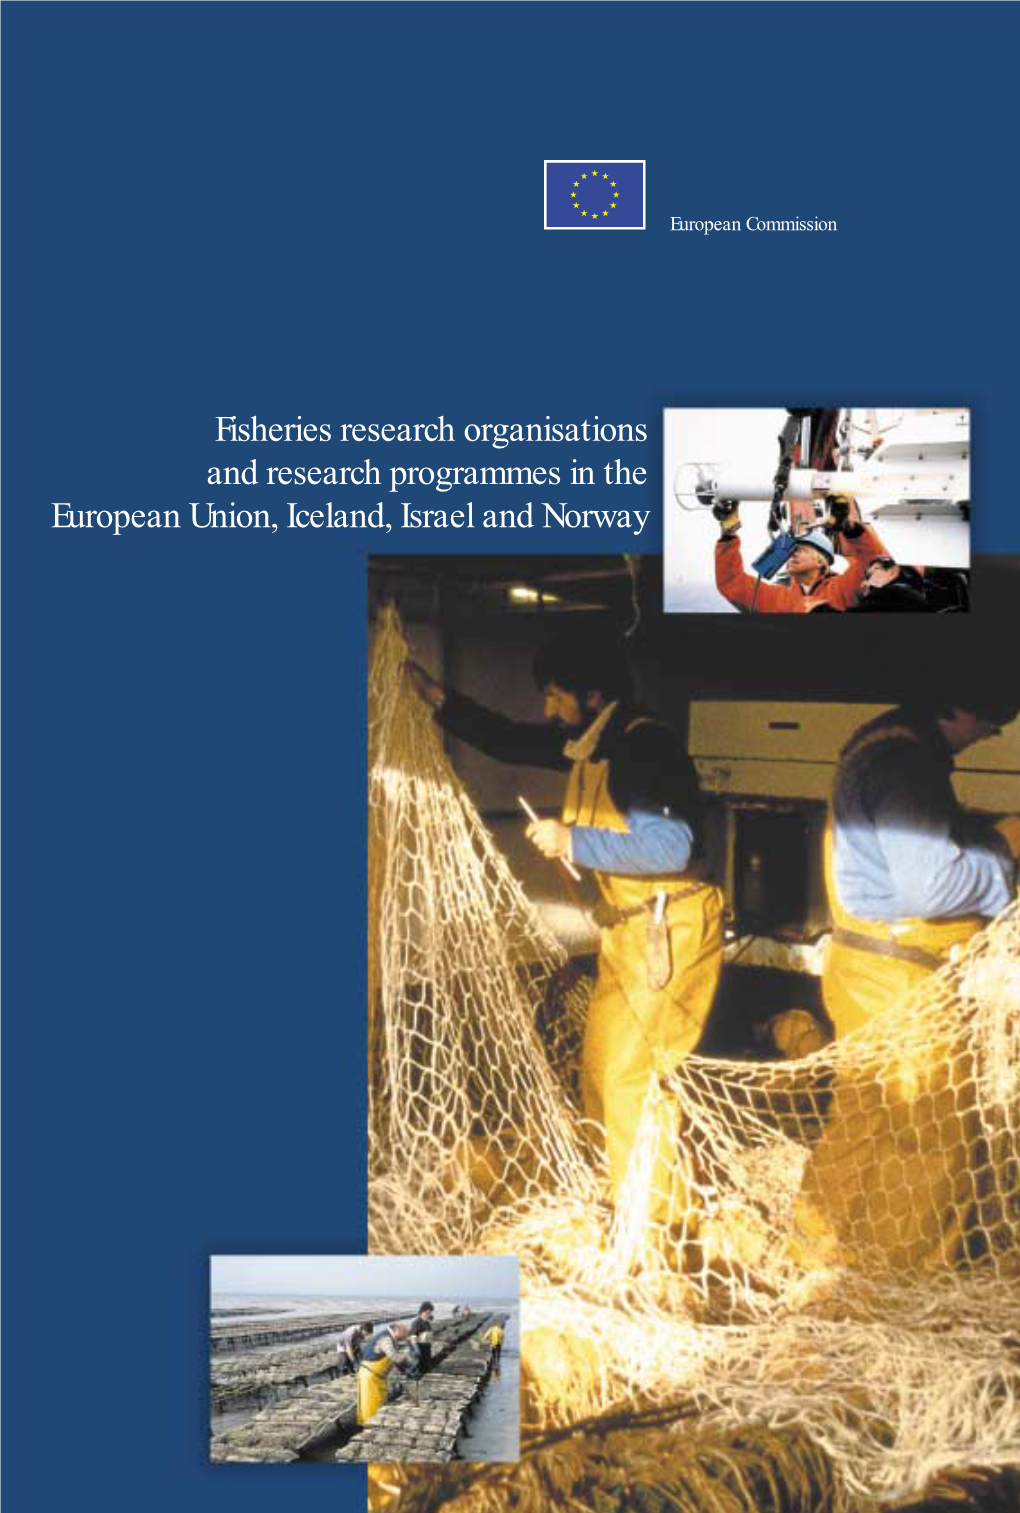 Fisheries Research Organisations and Research Programmes in the European Union, Iceland, Israel and Norway